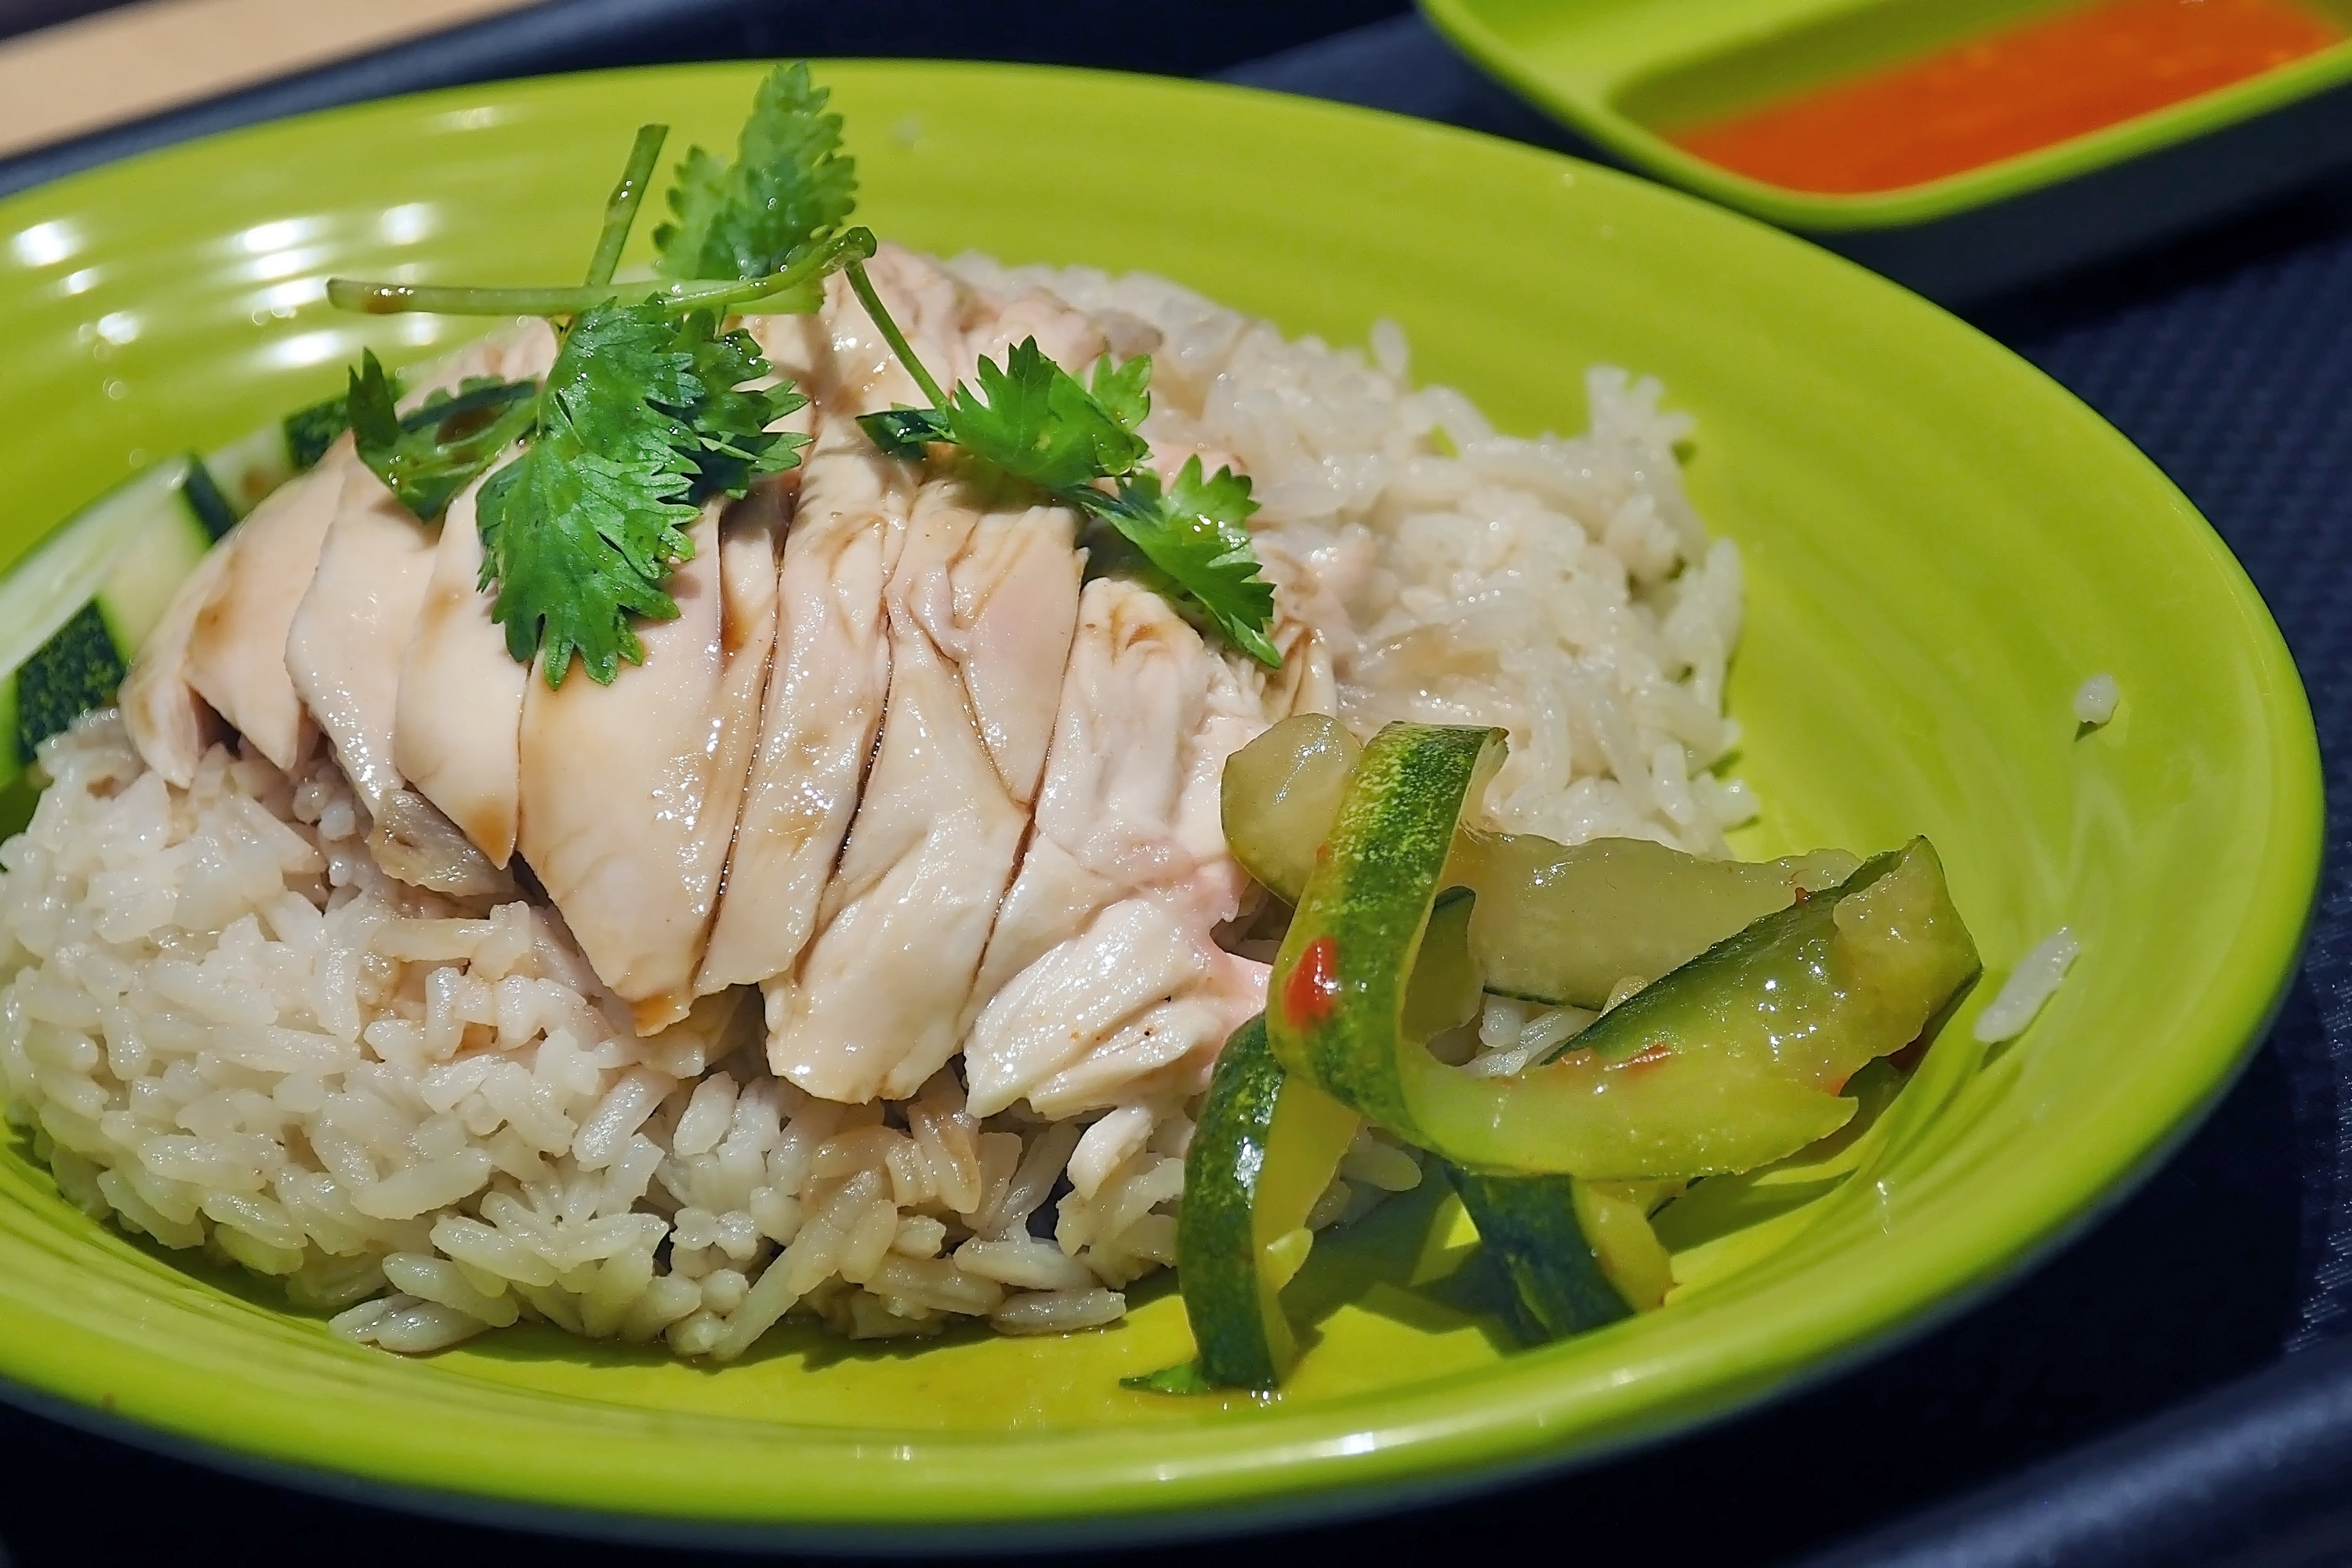 Plate of chicken rice